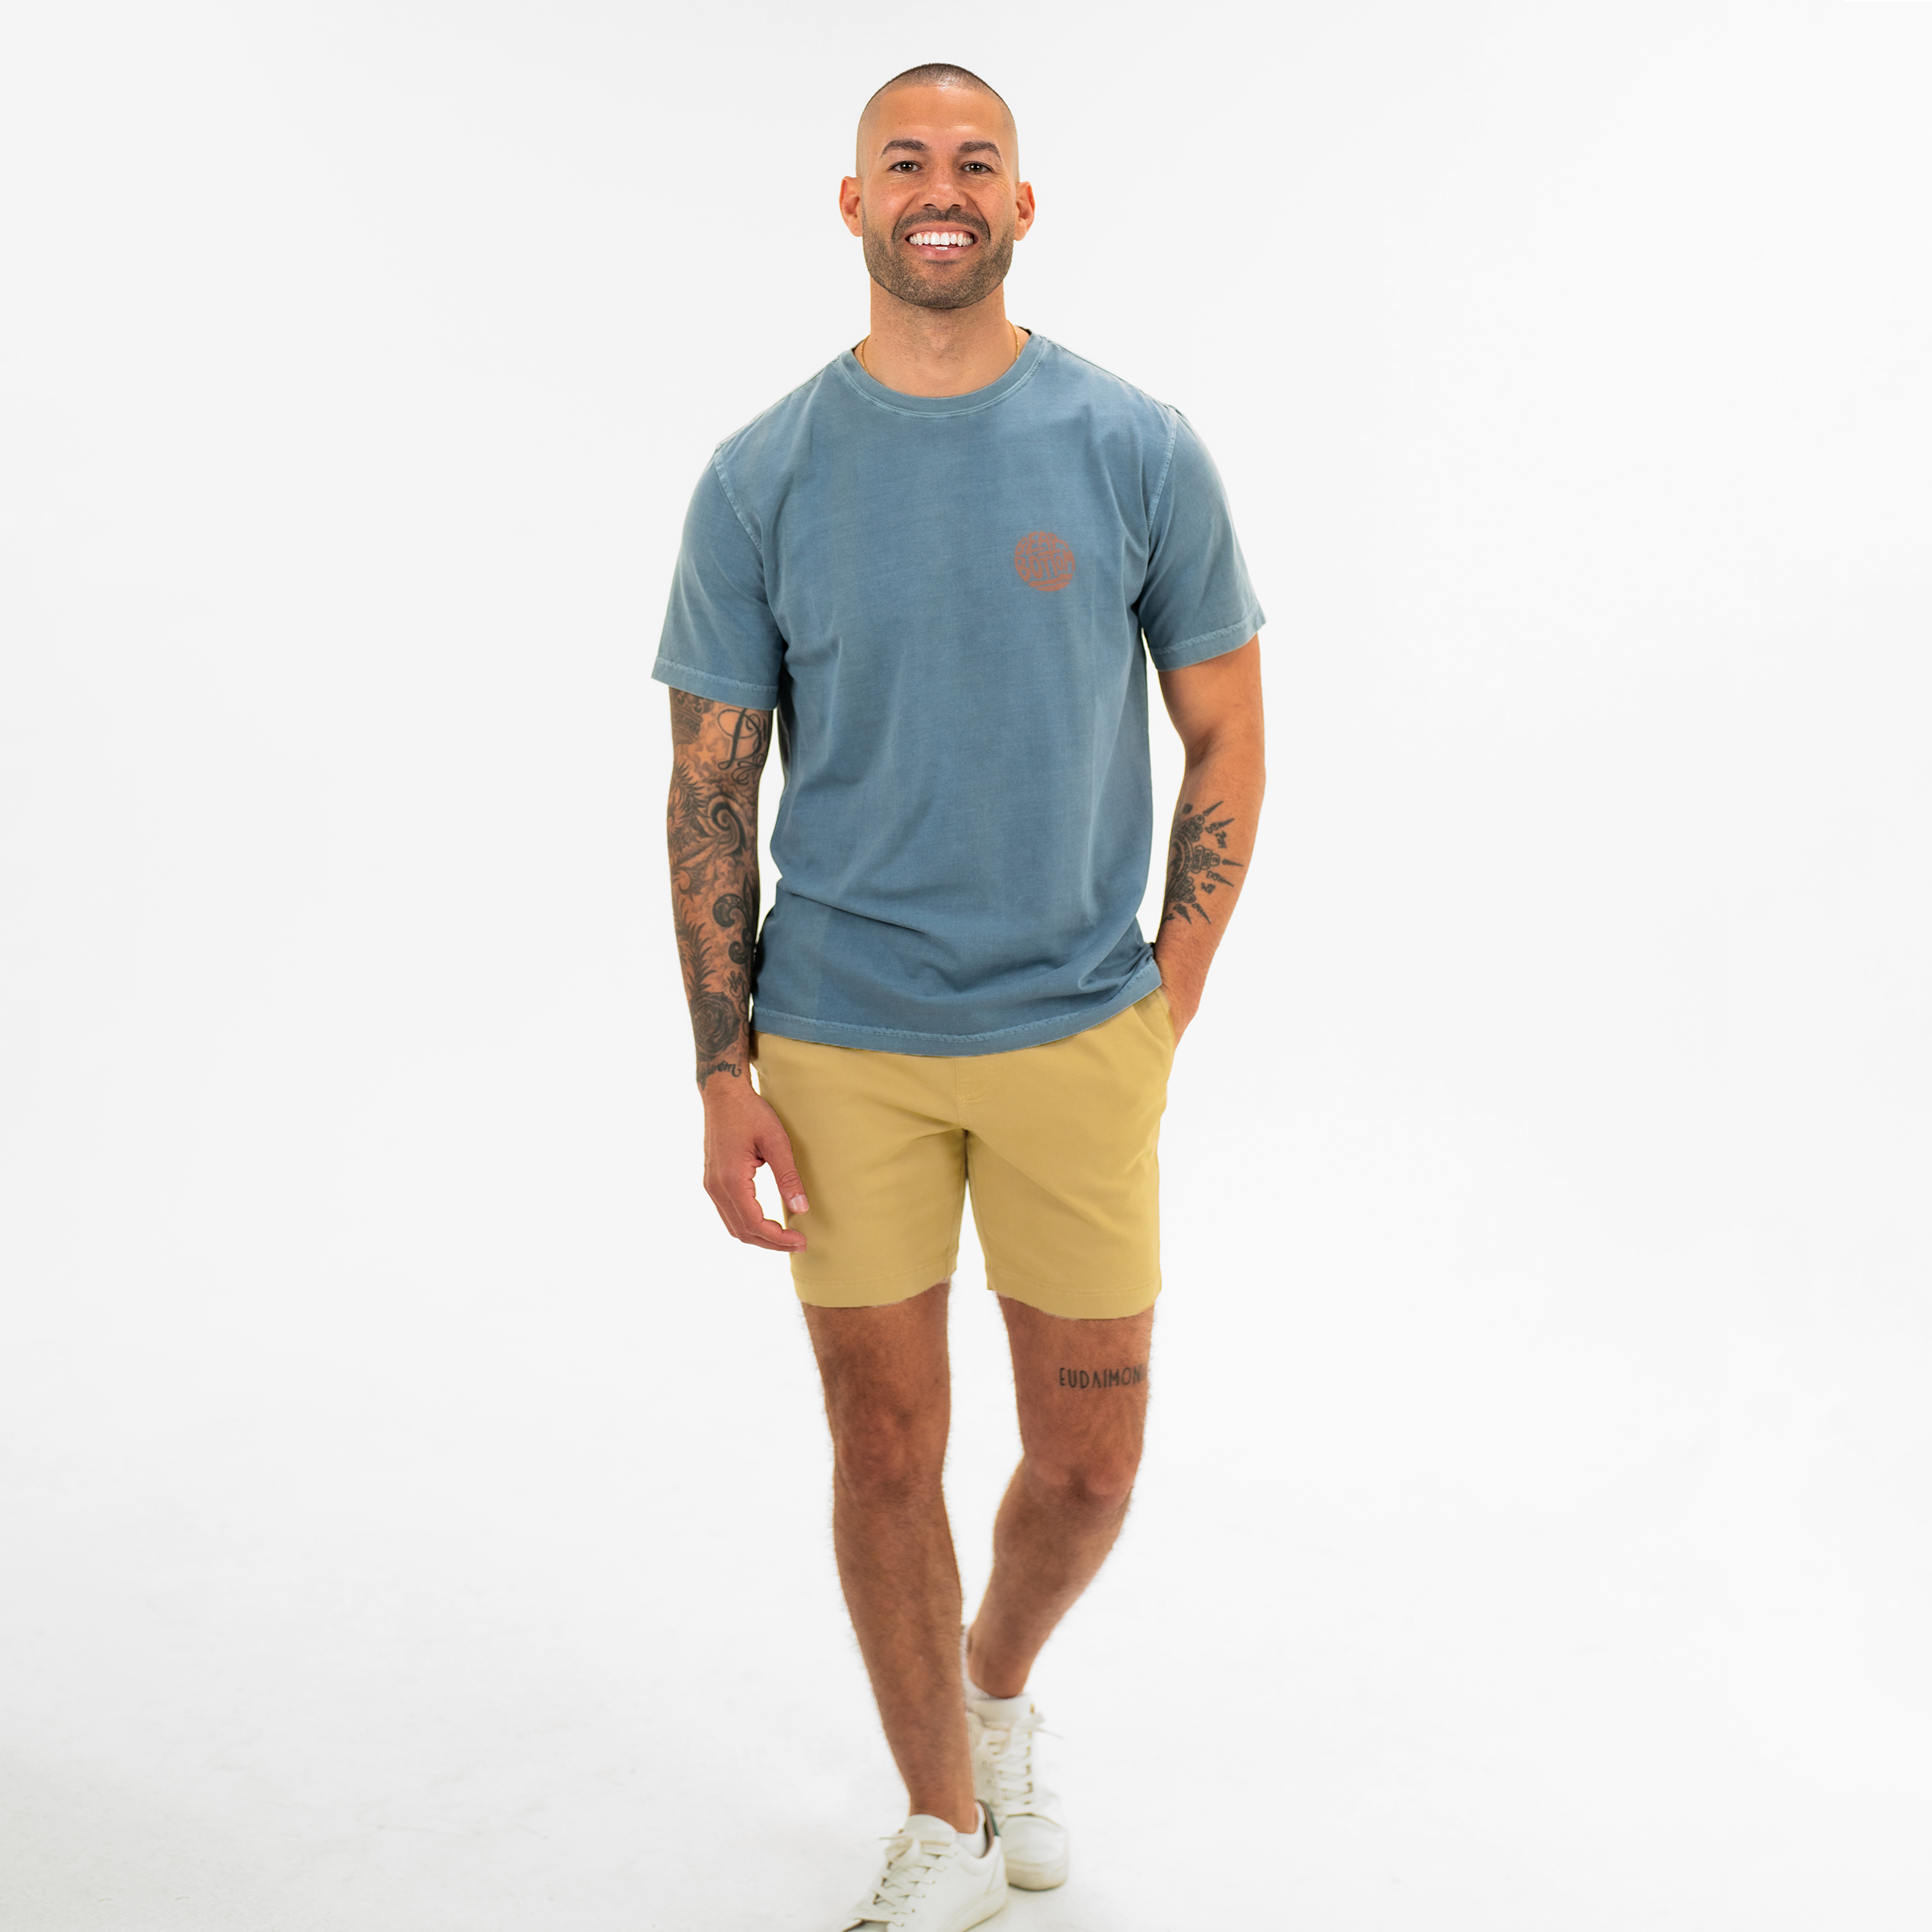 Alto Short 7" inseam in Khaki on model worn with blue Natural Dye Graphic Tee in Hangout print 